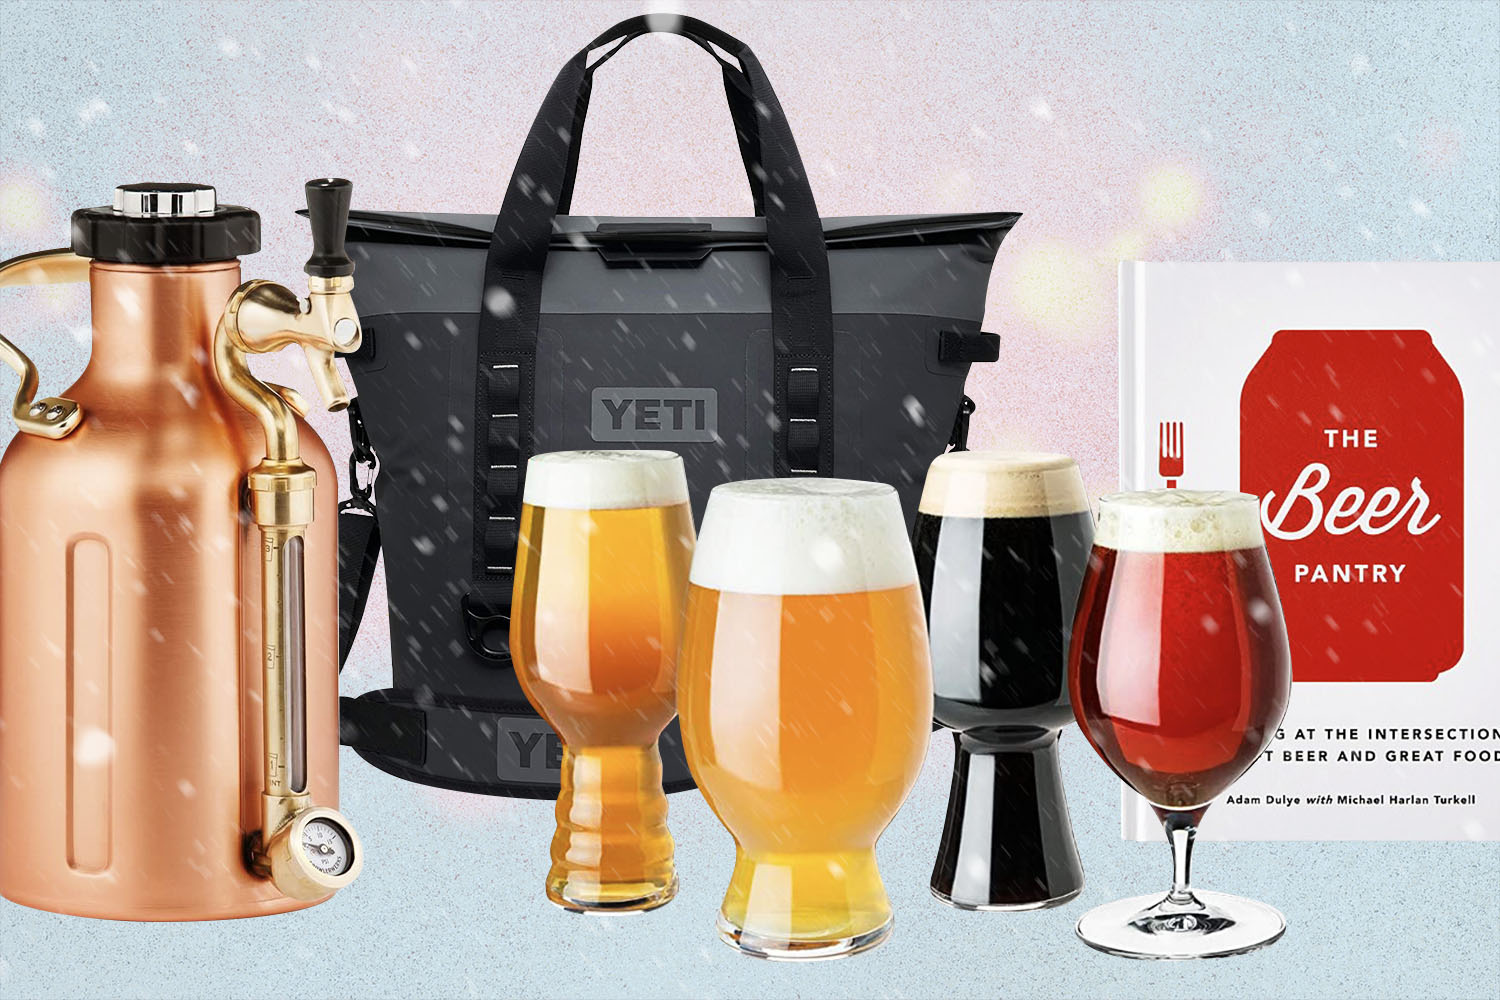 Gifts For Beer Lovers - 10 Amazing Gift Ideas For Beer Lovers | buymeagift